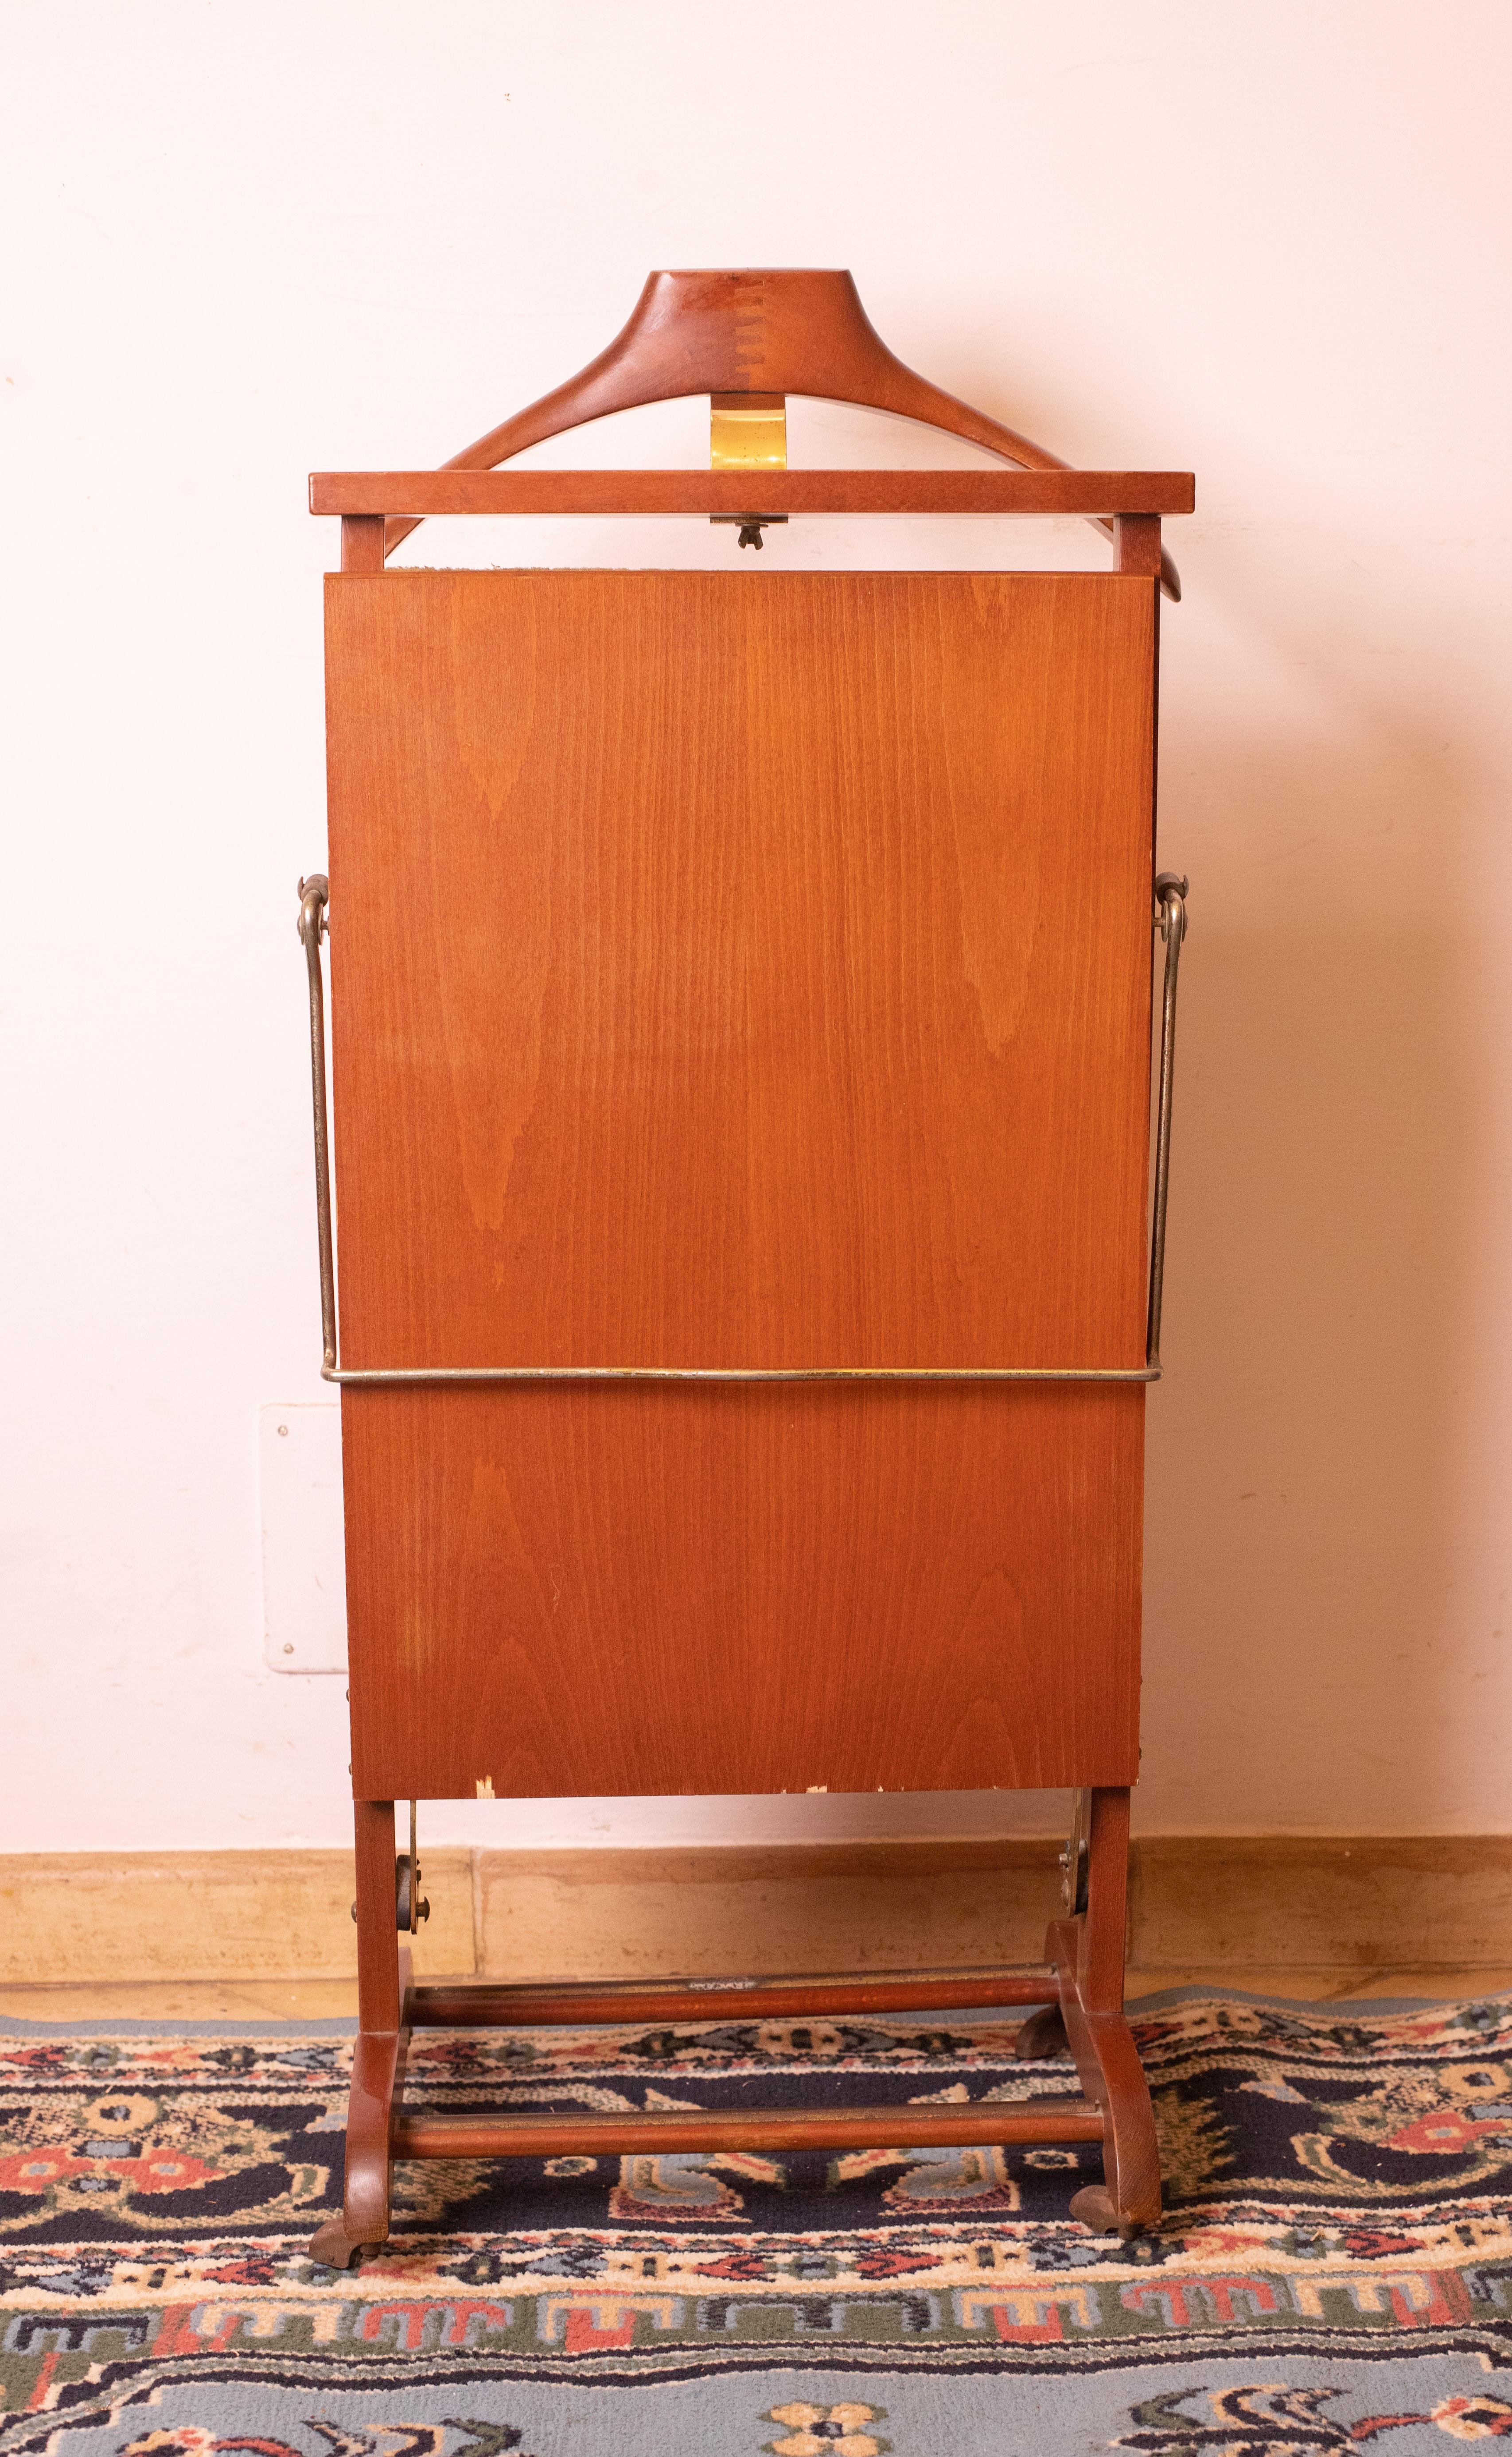 Beautiful coat stand and trouser press by Ico and Luisa Parisi for Fratelli Reguitti, Italy.
Executed in a beautiful lacquered walnut with brass inserts.
Visible brand and signature on the exterior.
This particular example rests on working